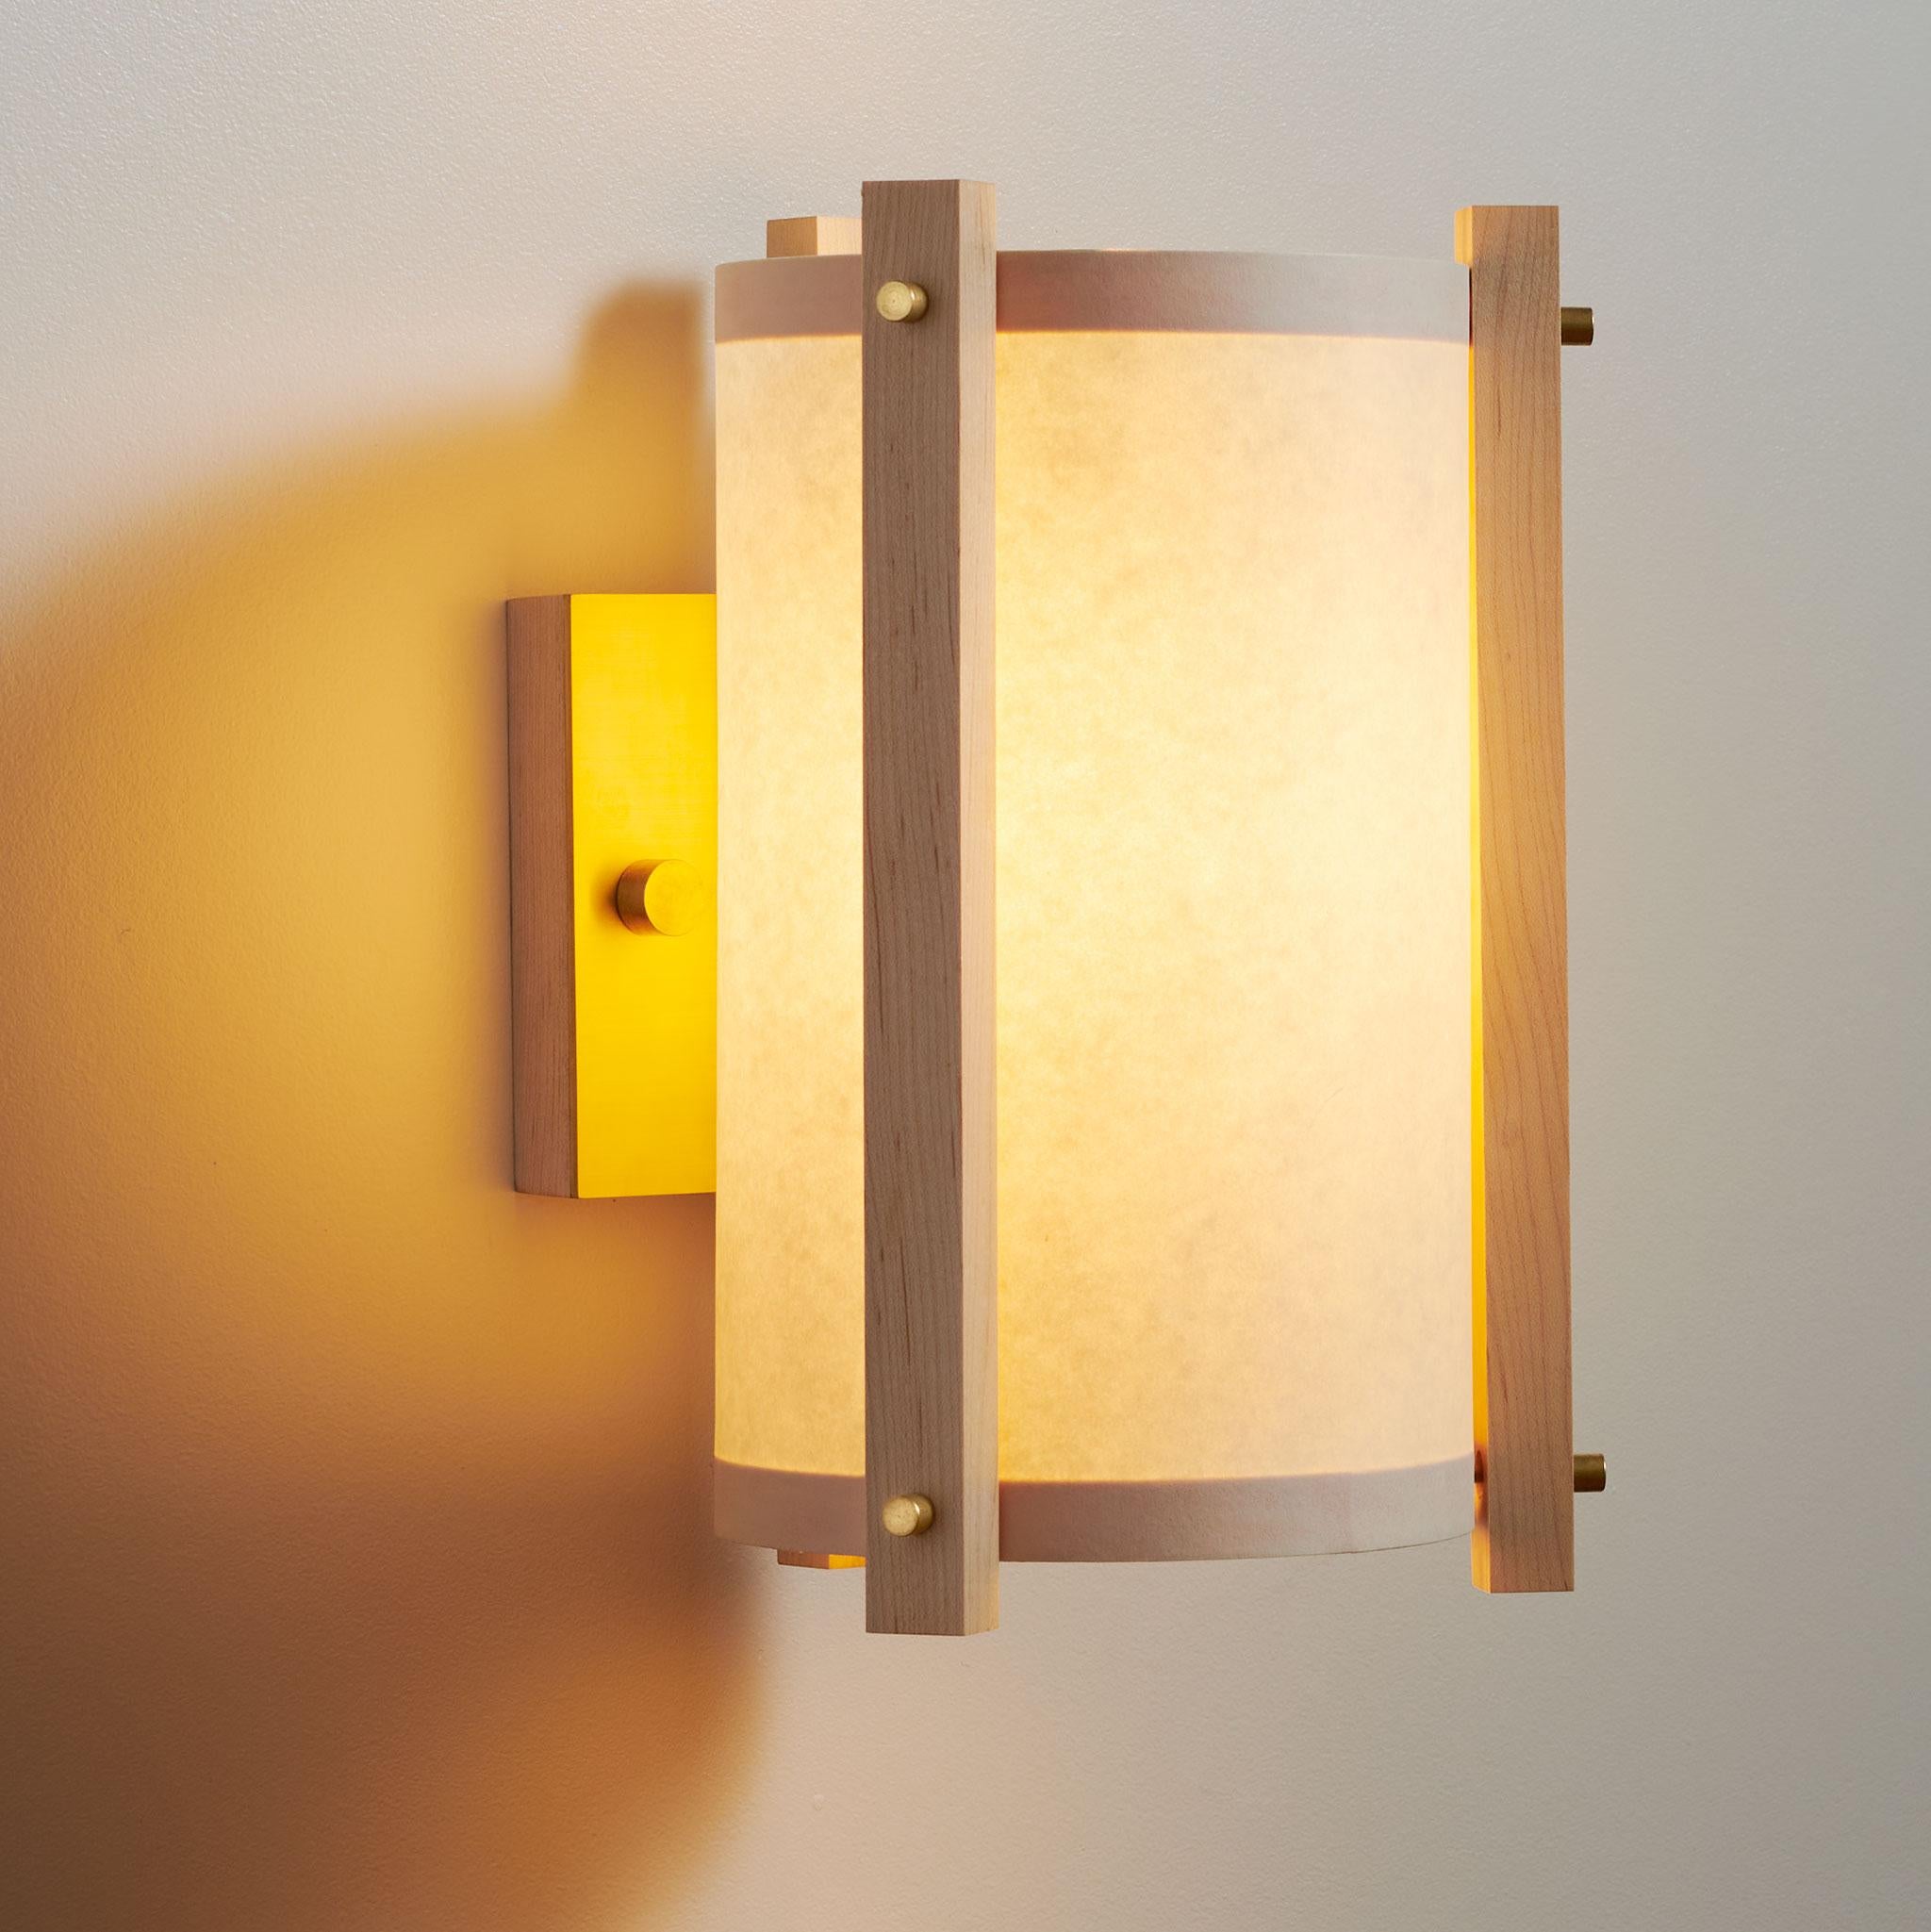 Delicate wall lighting with brass accents brings together a soft glow to any space. With a simple modern design, these sconces can be equally appreciated when illuminated on or off. 

The wood hand cut from a light Marple. Waxed raw brass accents